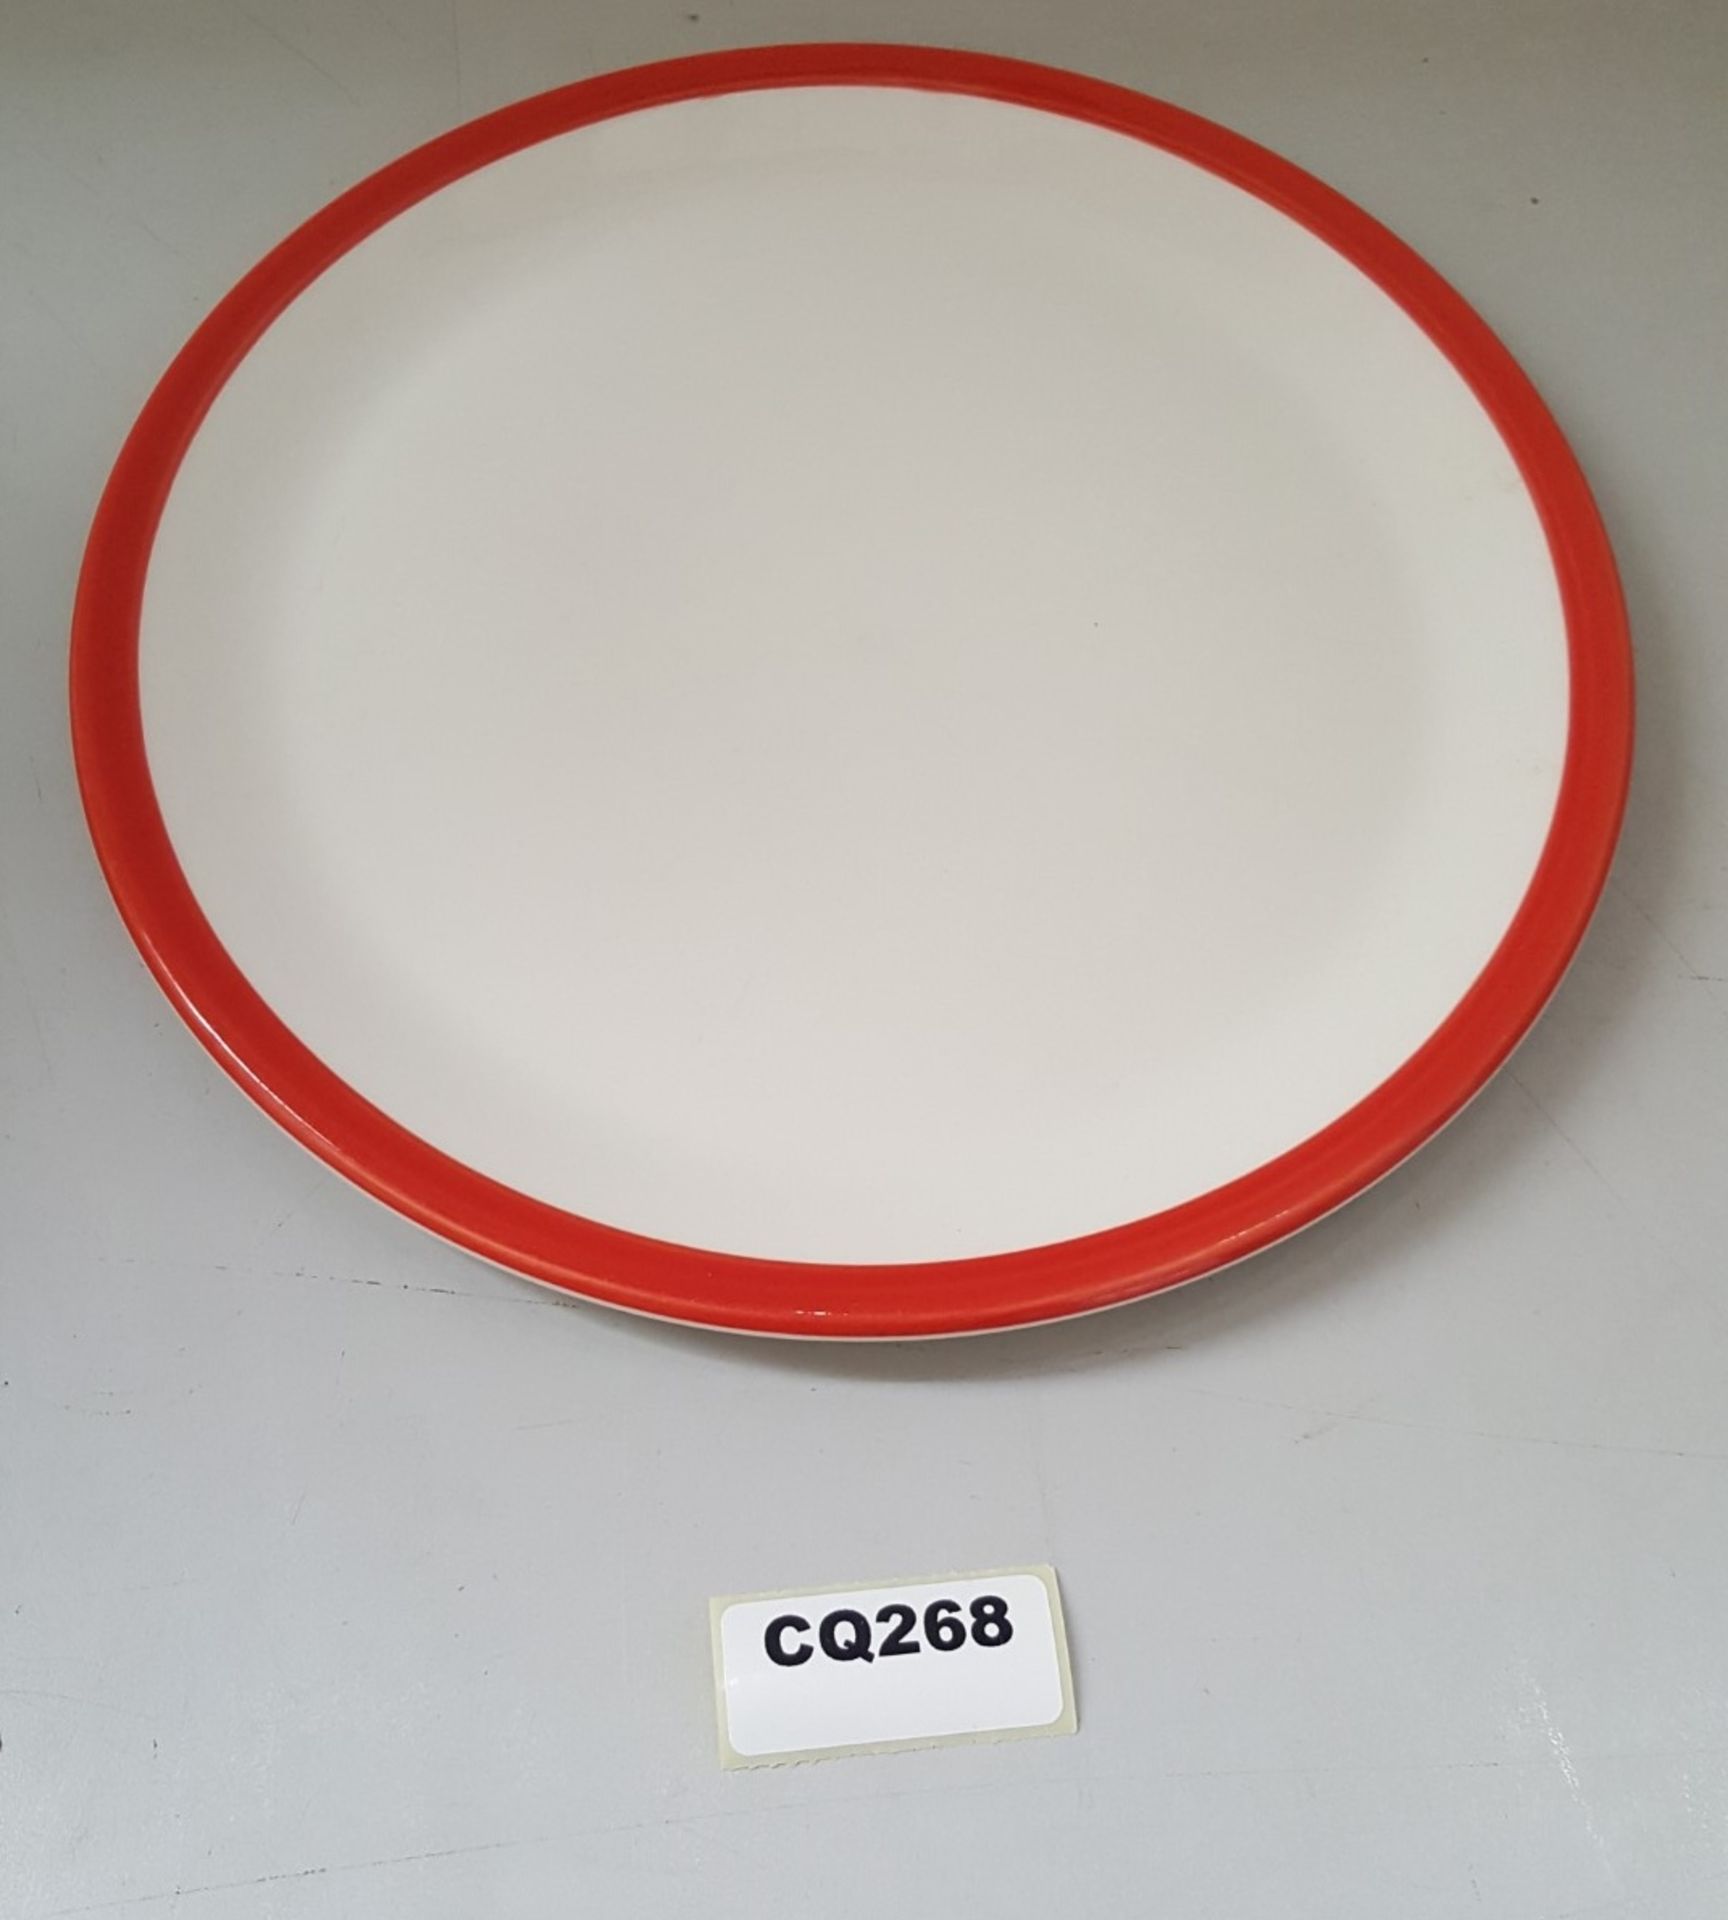 22 x Steelite Coupe Plates White With Red Outline Egde 27.5CM - Ref CQ268 - Image 3 of 4